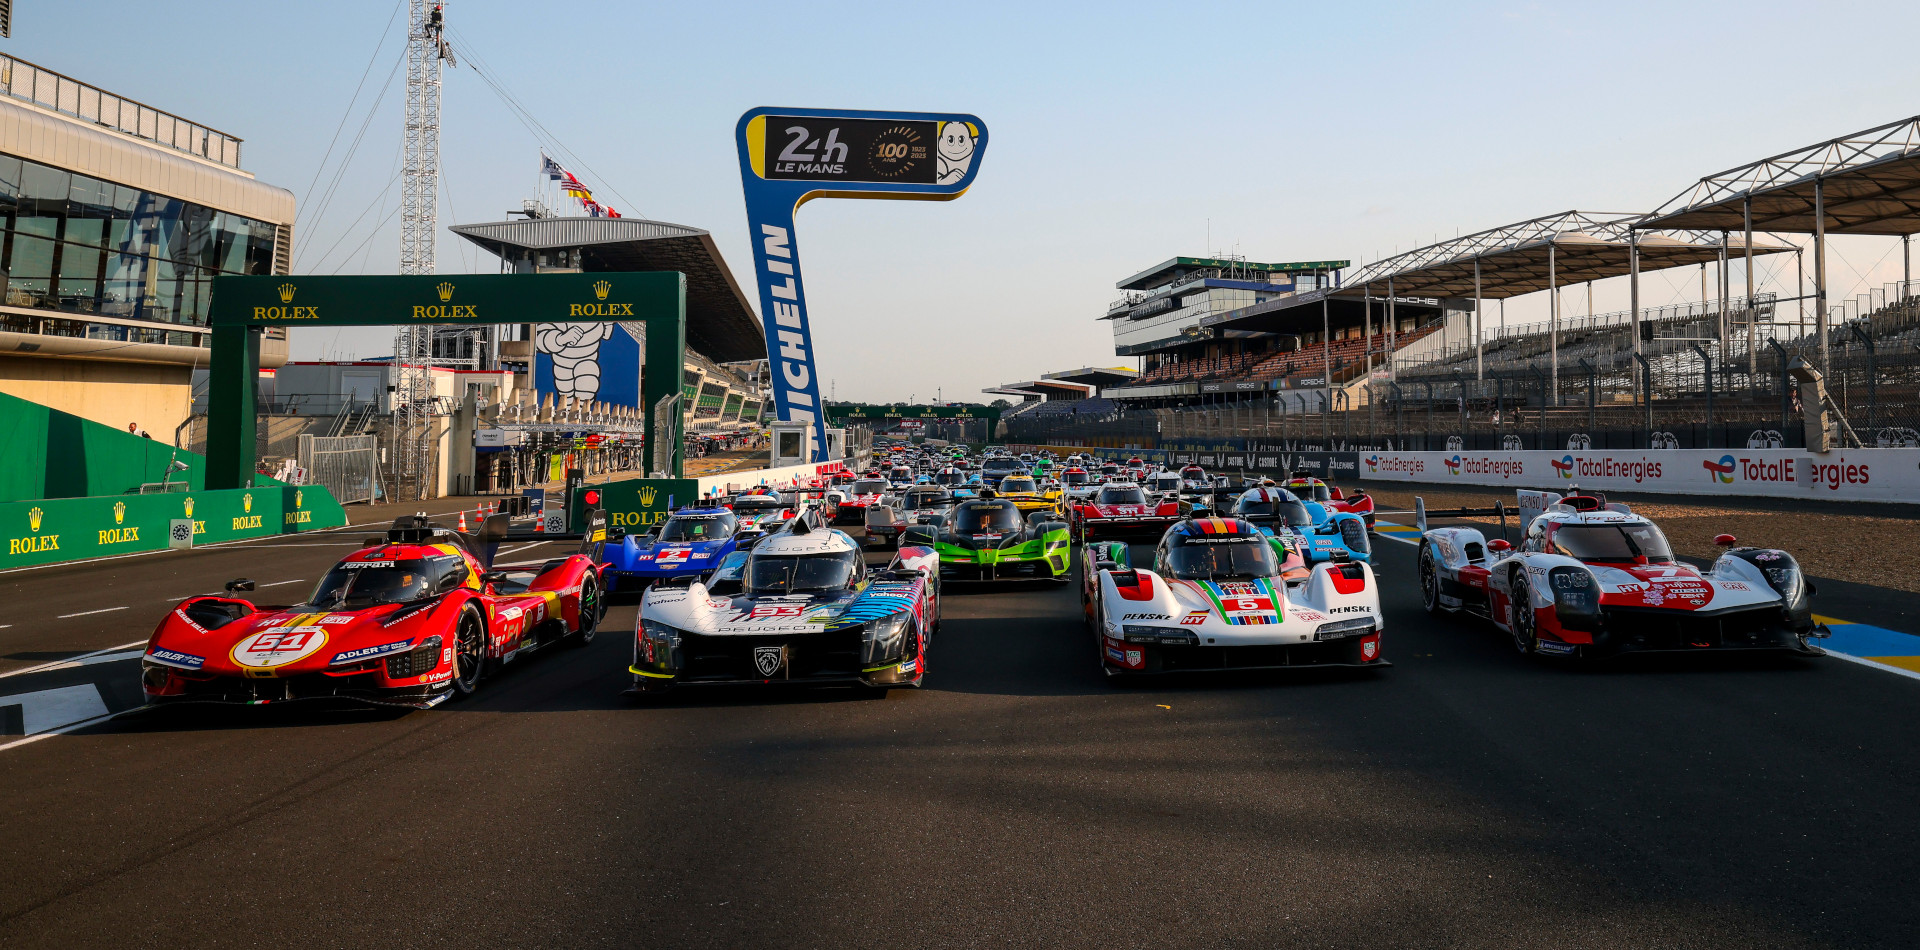 24 Hours of Le Mans and FIA WEC